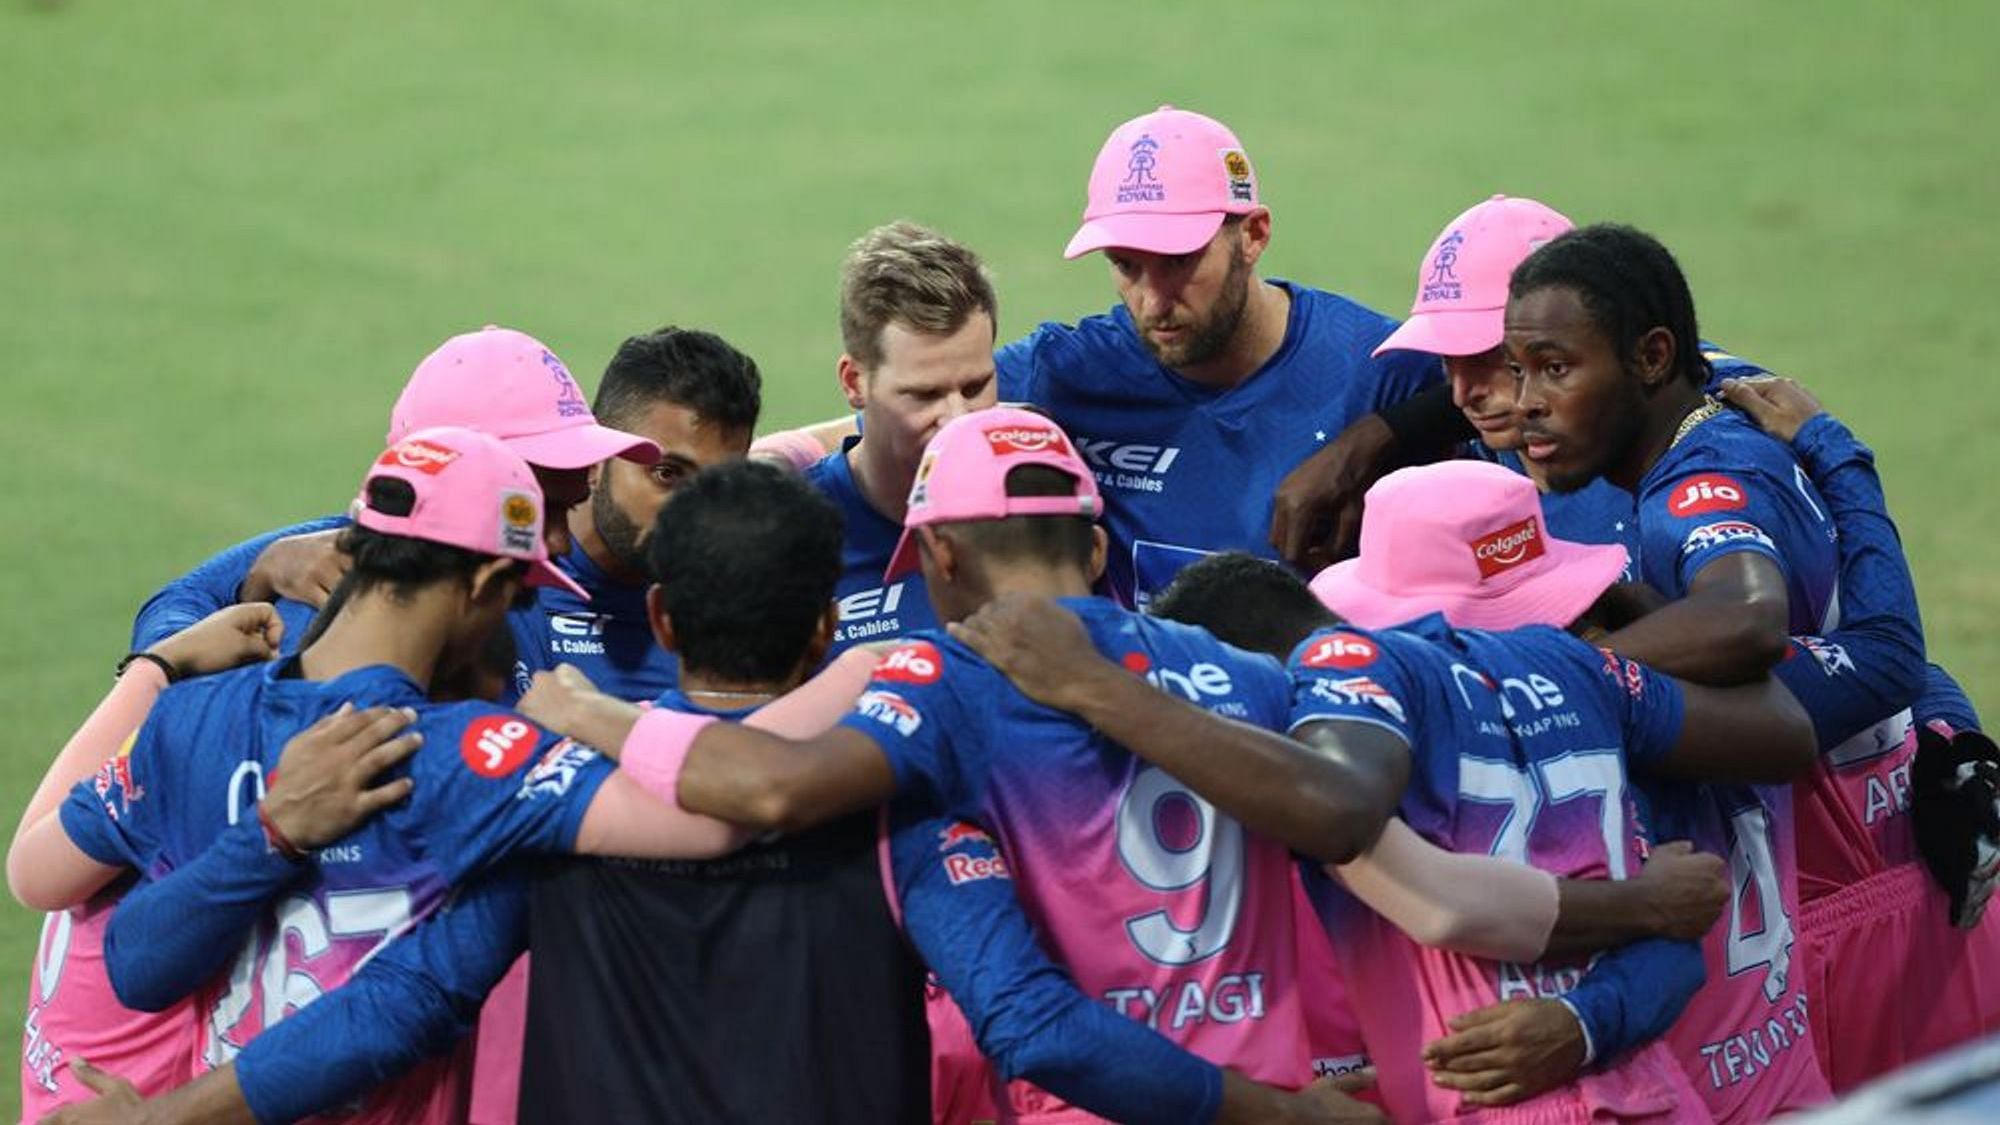 Rajasthan Royals after winning the first two games have lost four games in a row.